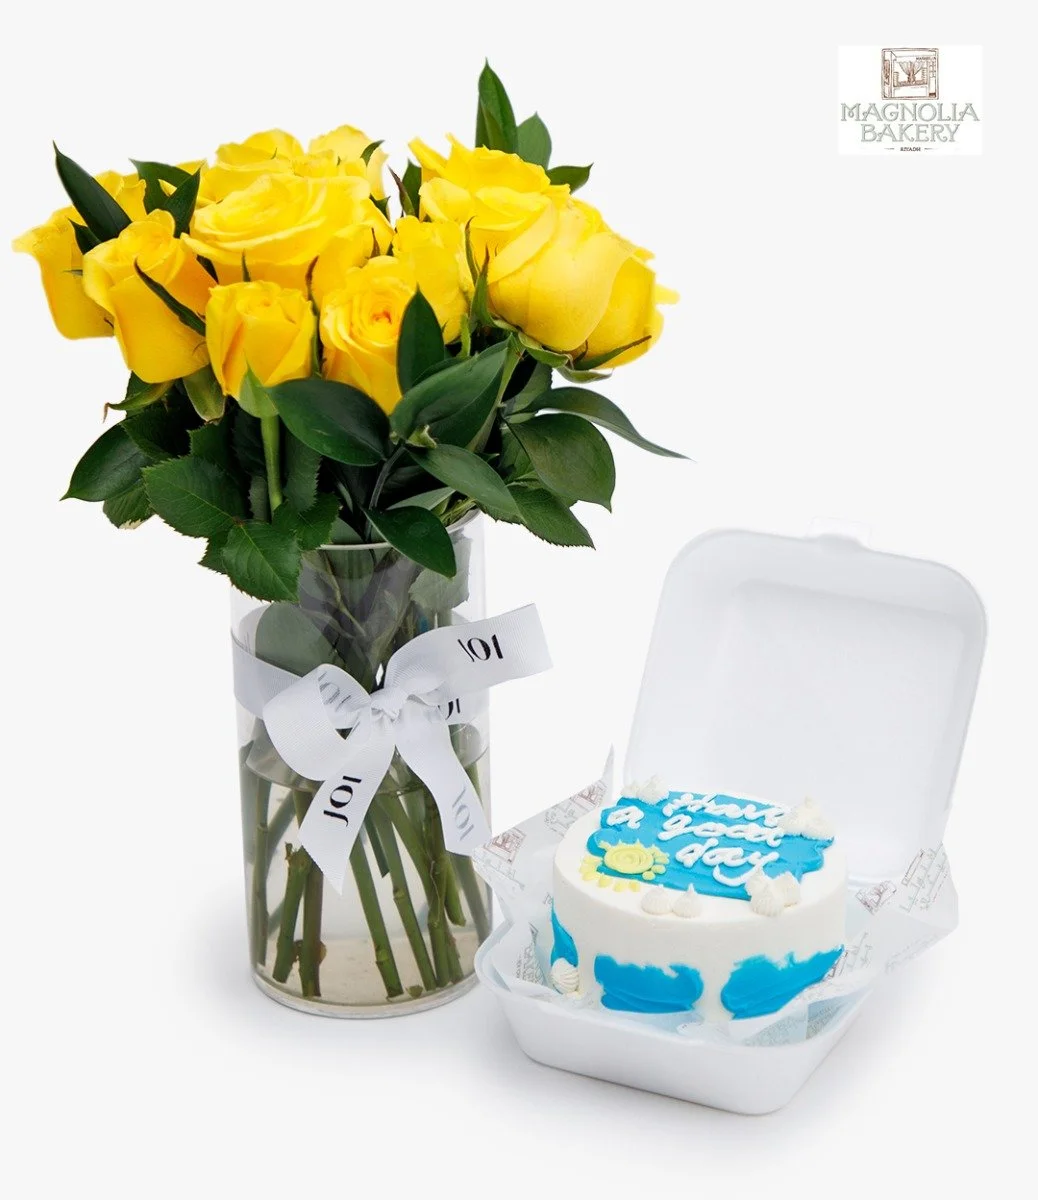 Have A Nice Day Lunch Box Cake And Yellow Roses Flowers Bundle